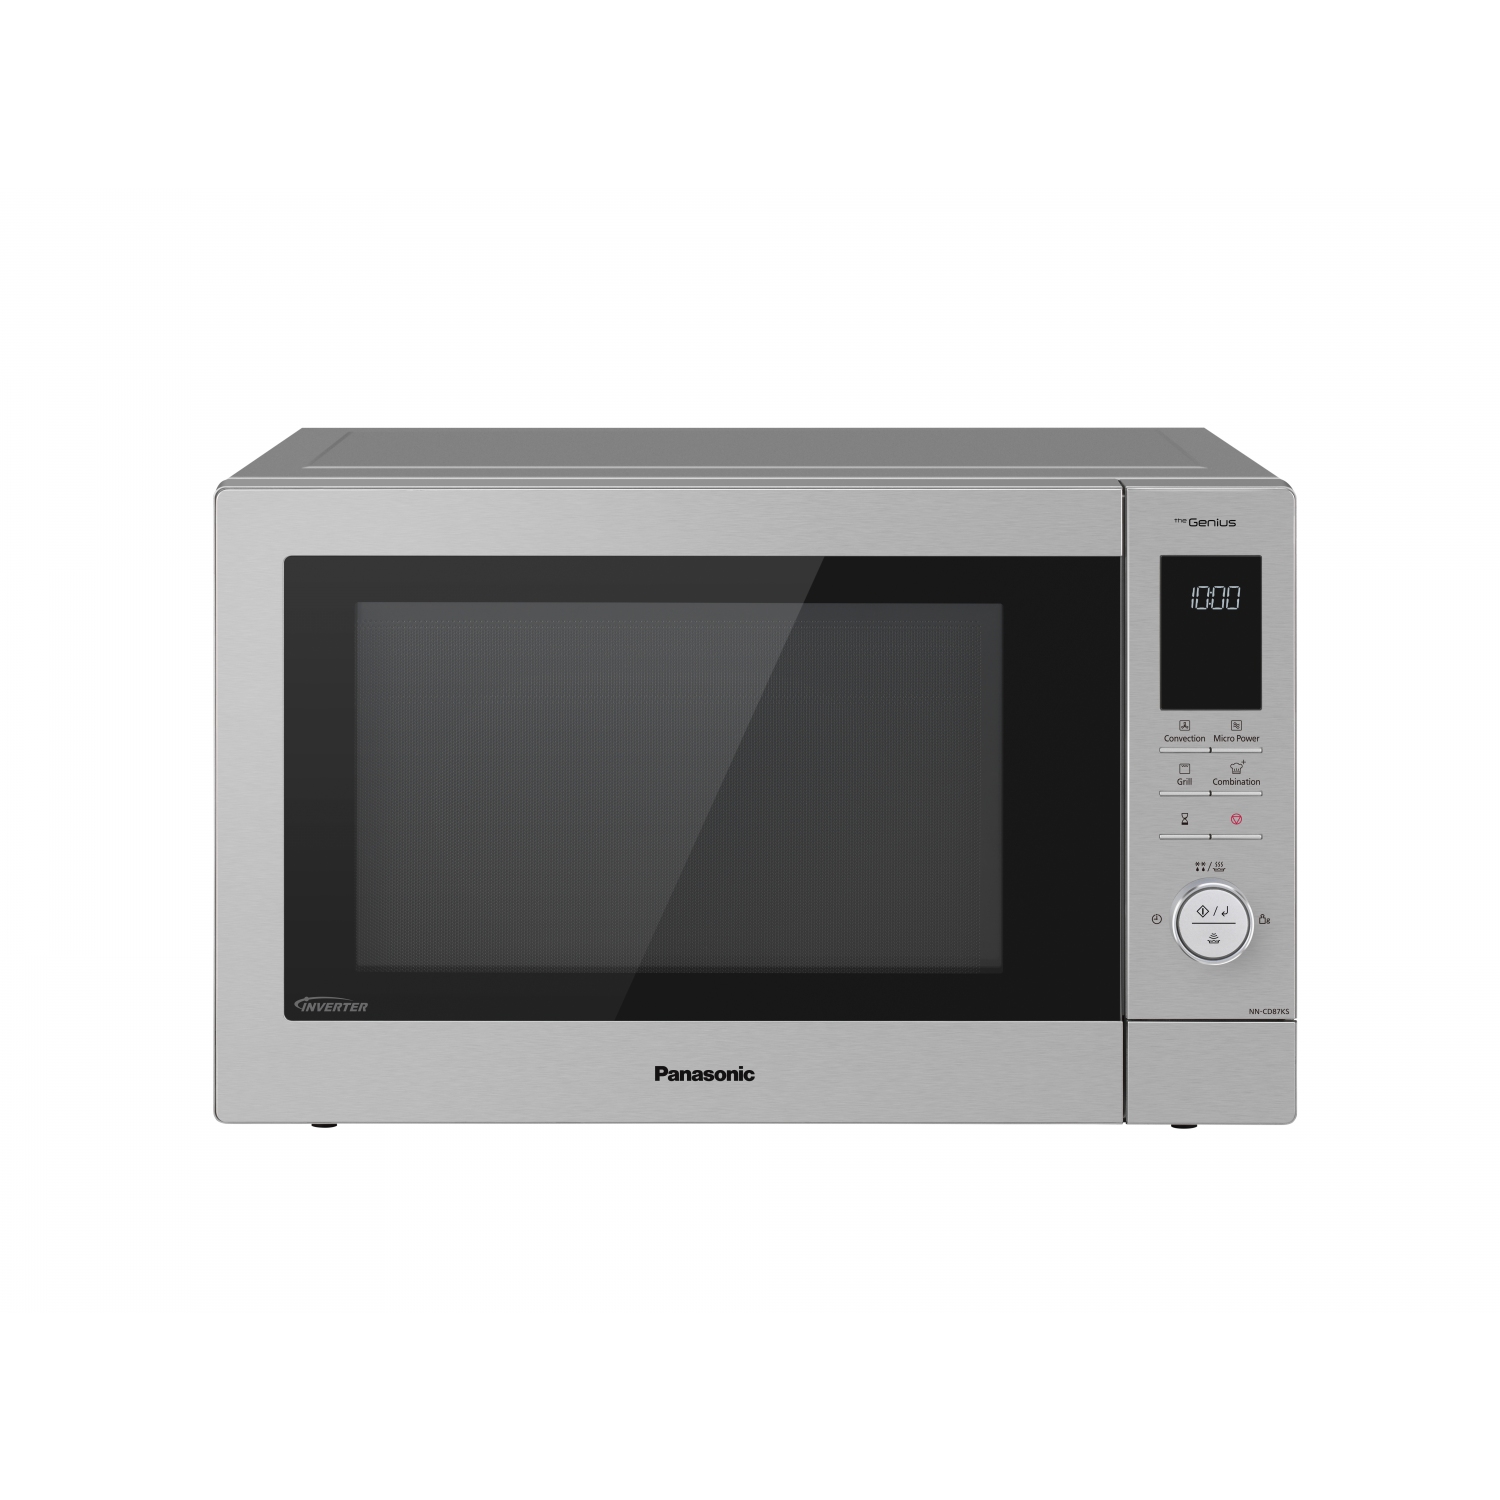 Panasonic 34L 1000w Combination Microwave Oven with Inverter Technology and 1300w Grill - 0